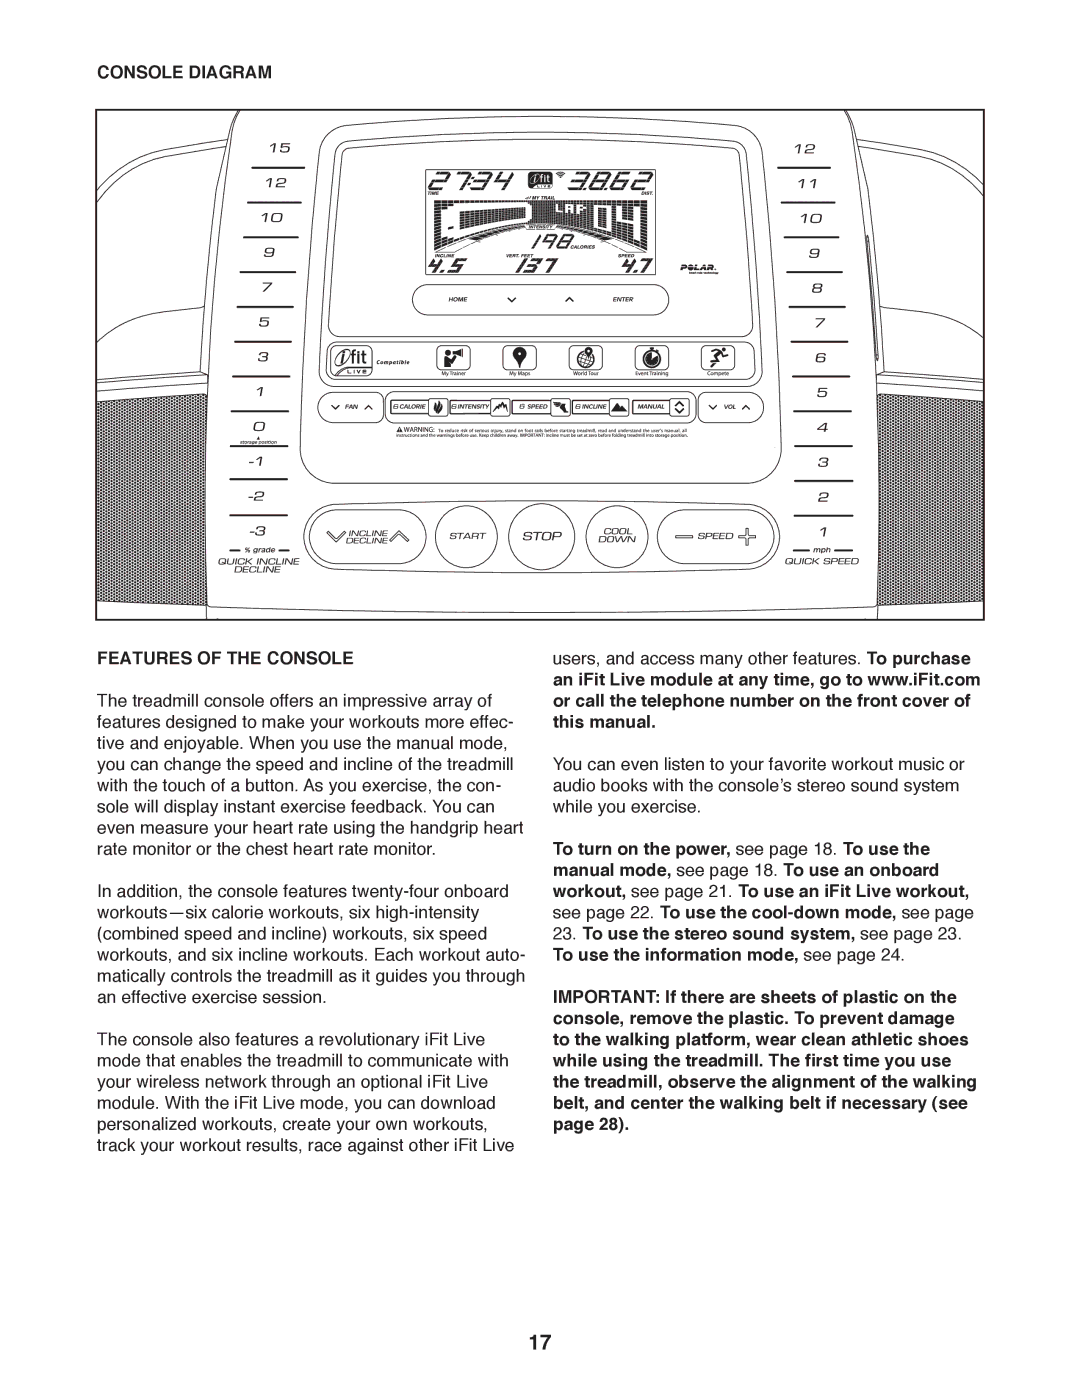 ProForm PFTL13011.0 user manual Console Diagram Features of the Console 